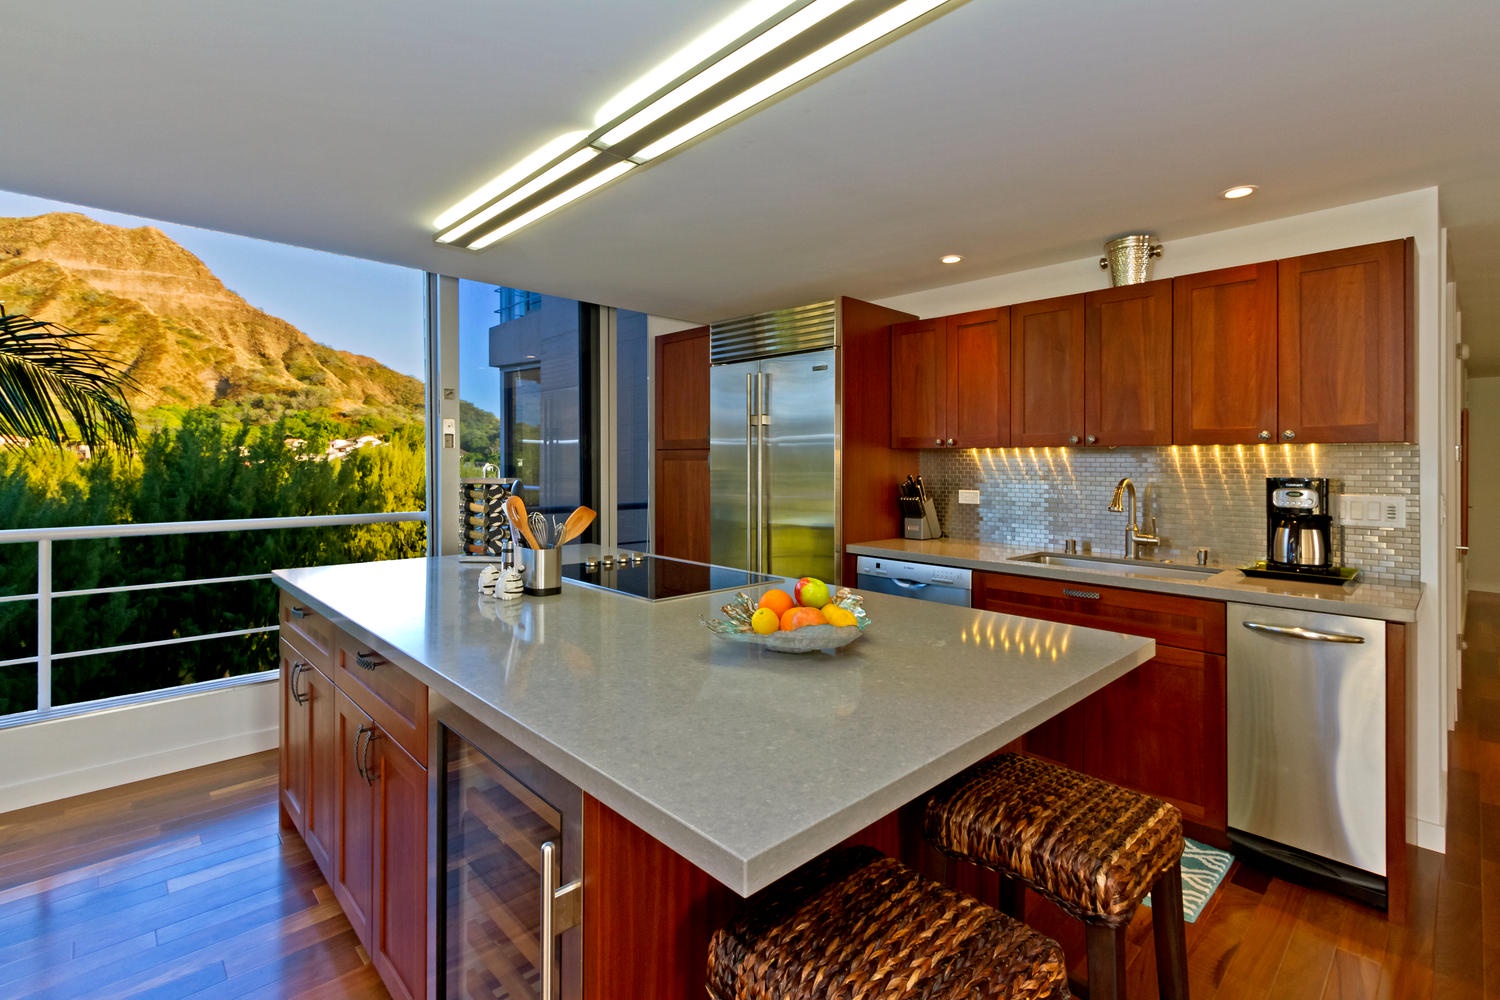 Honolulu Vacation Rentals, Executive Gold Coast Oceanfront Suite - Open-concept kitchen, ideal for entertaining.